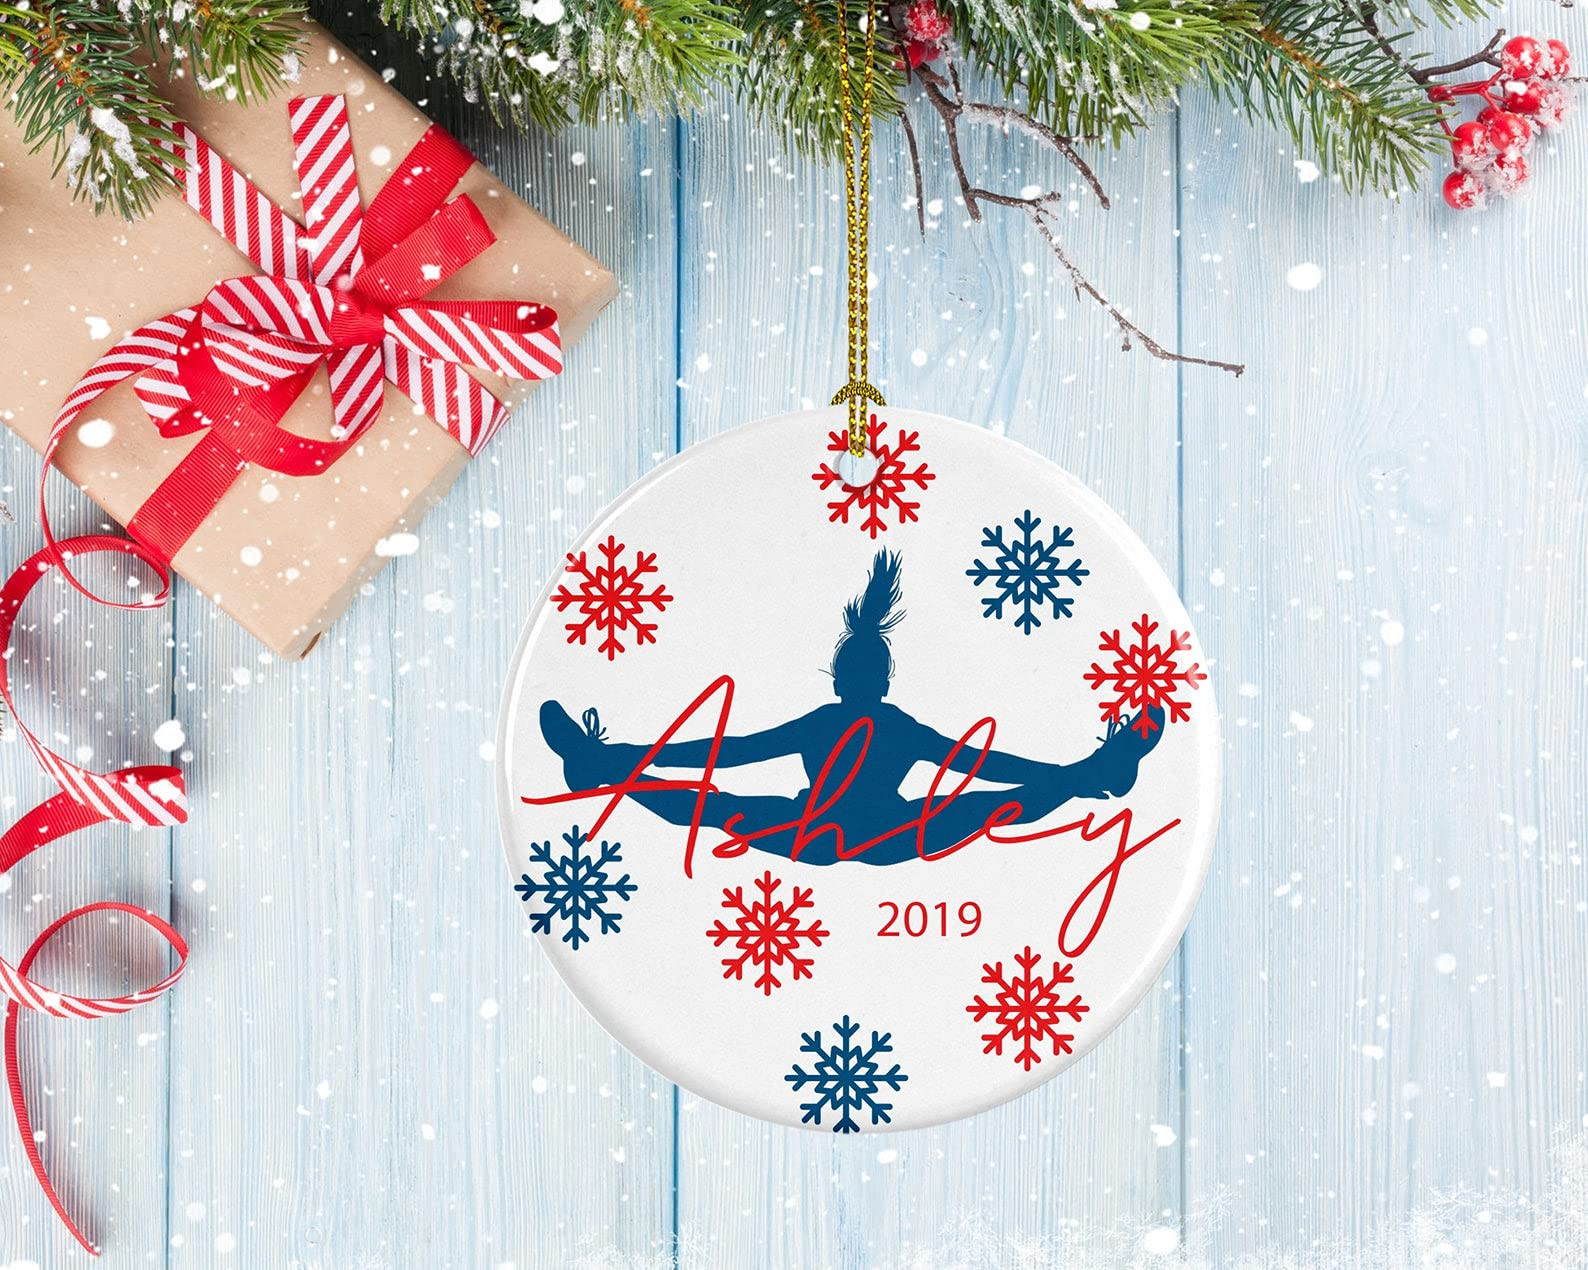 Personalized Cheerleader Ornament Porcelain Ornament Toe Touch Design Gifts For Cheerleaders Christmas Ornament Hanging Decoration Christmas Tree Ornament -ghepten-1cuckfh